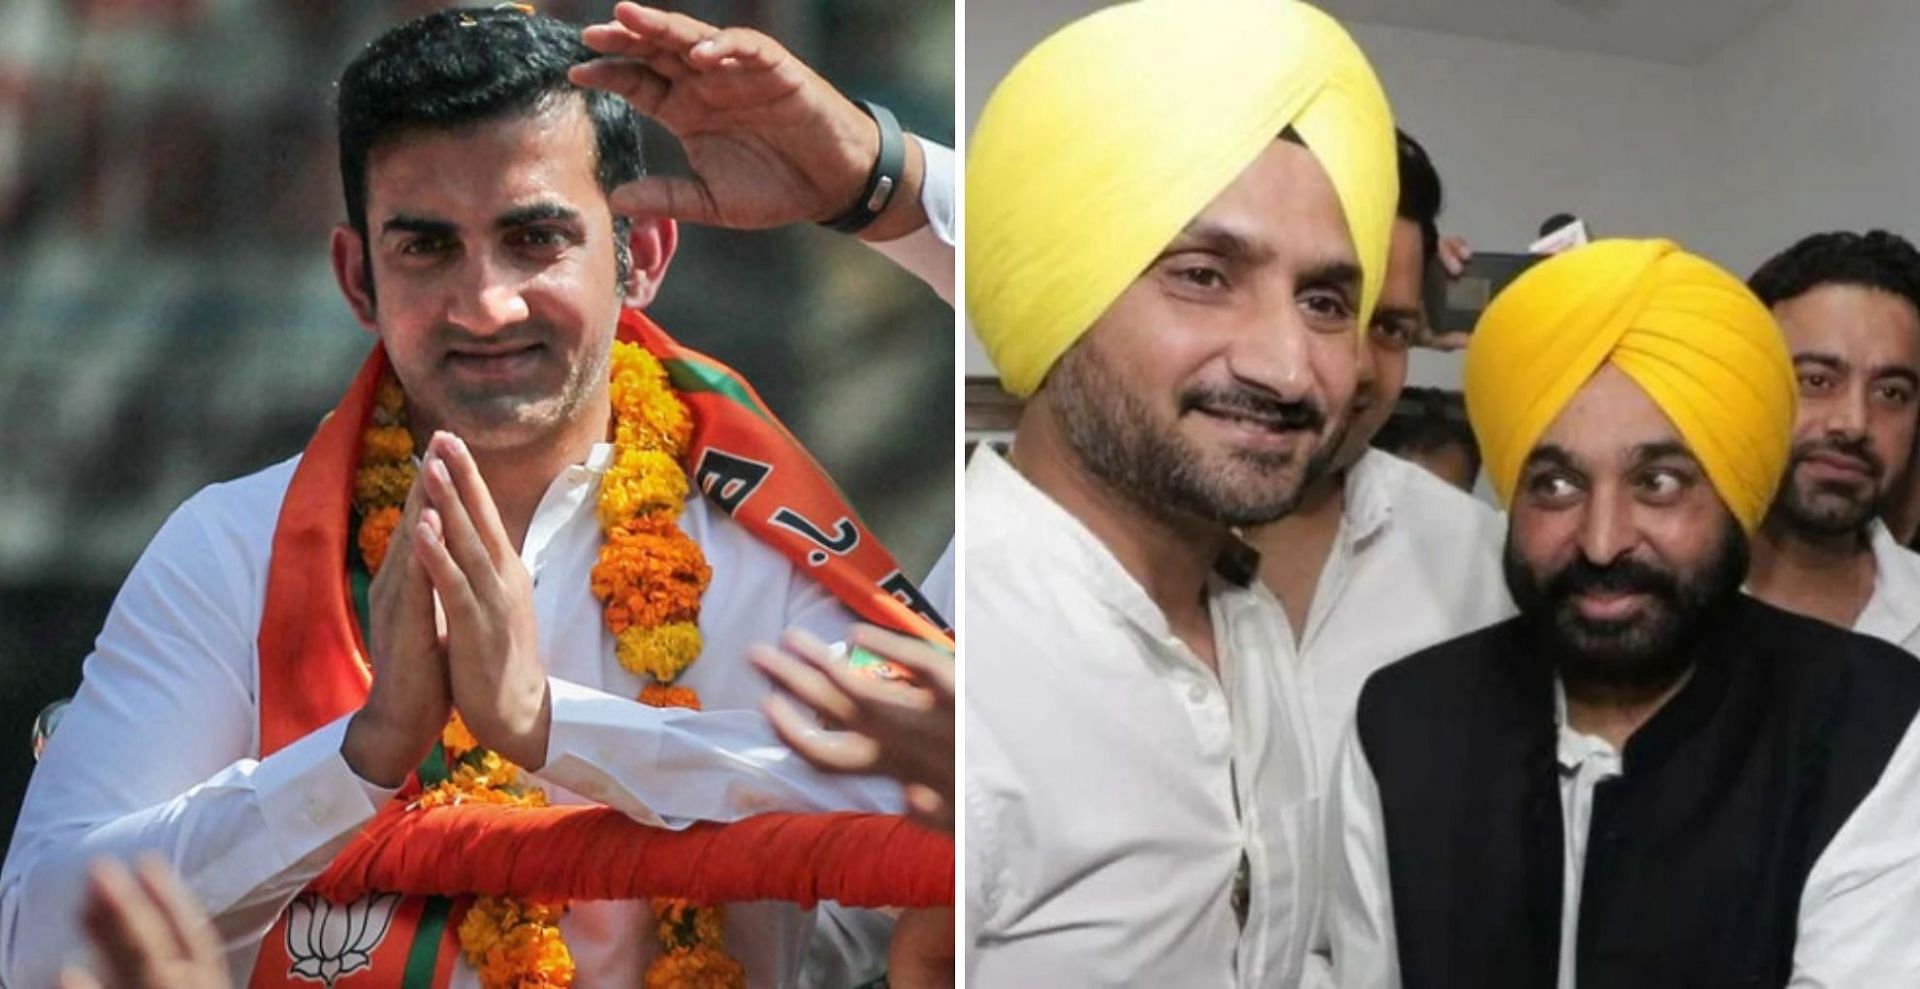 Indian cricketers and politics go hand-in-hand.